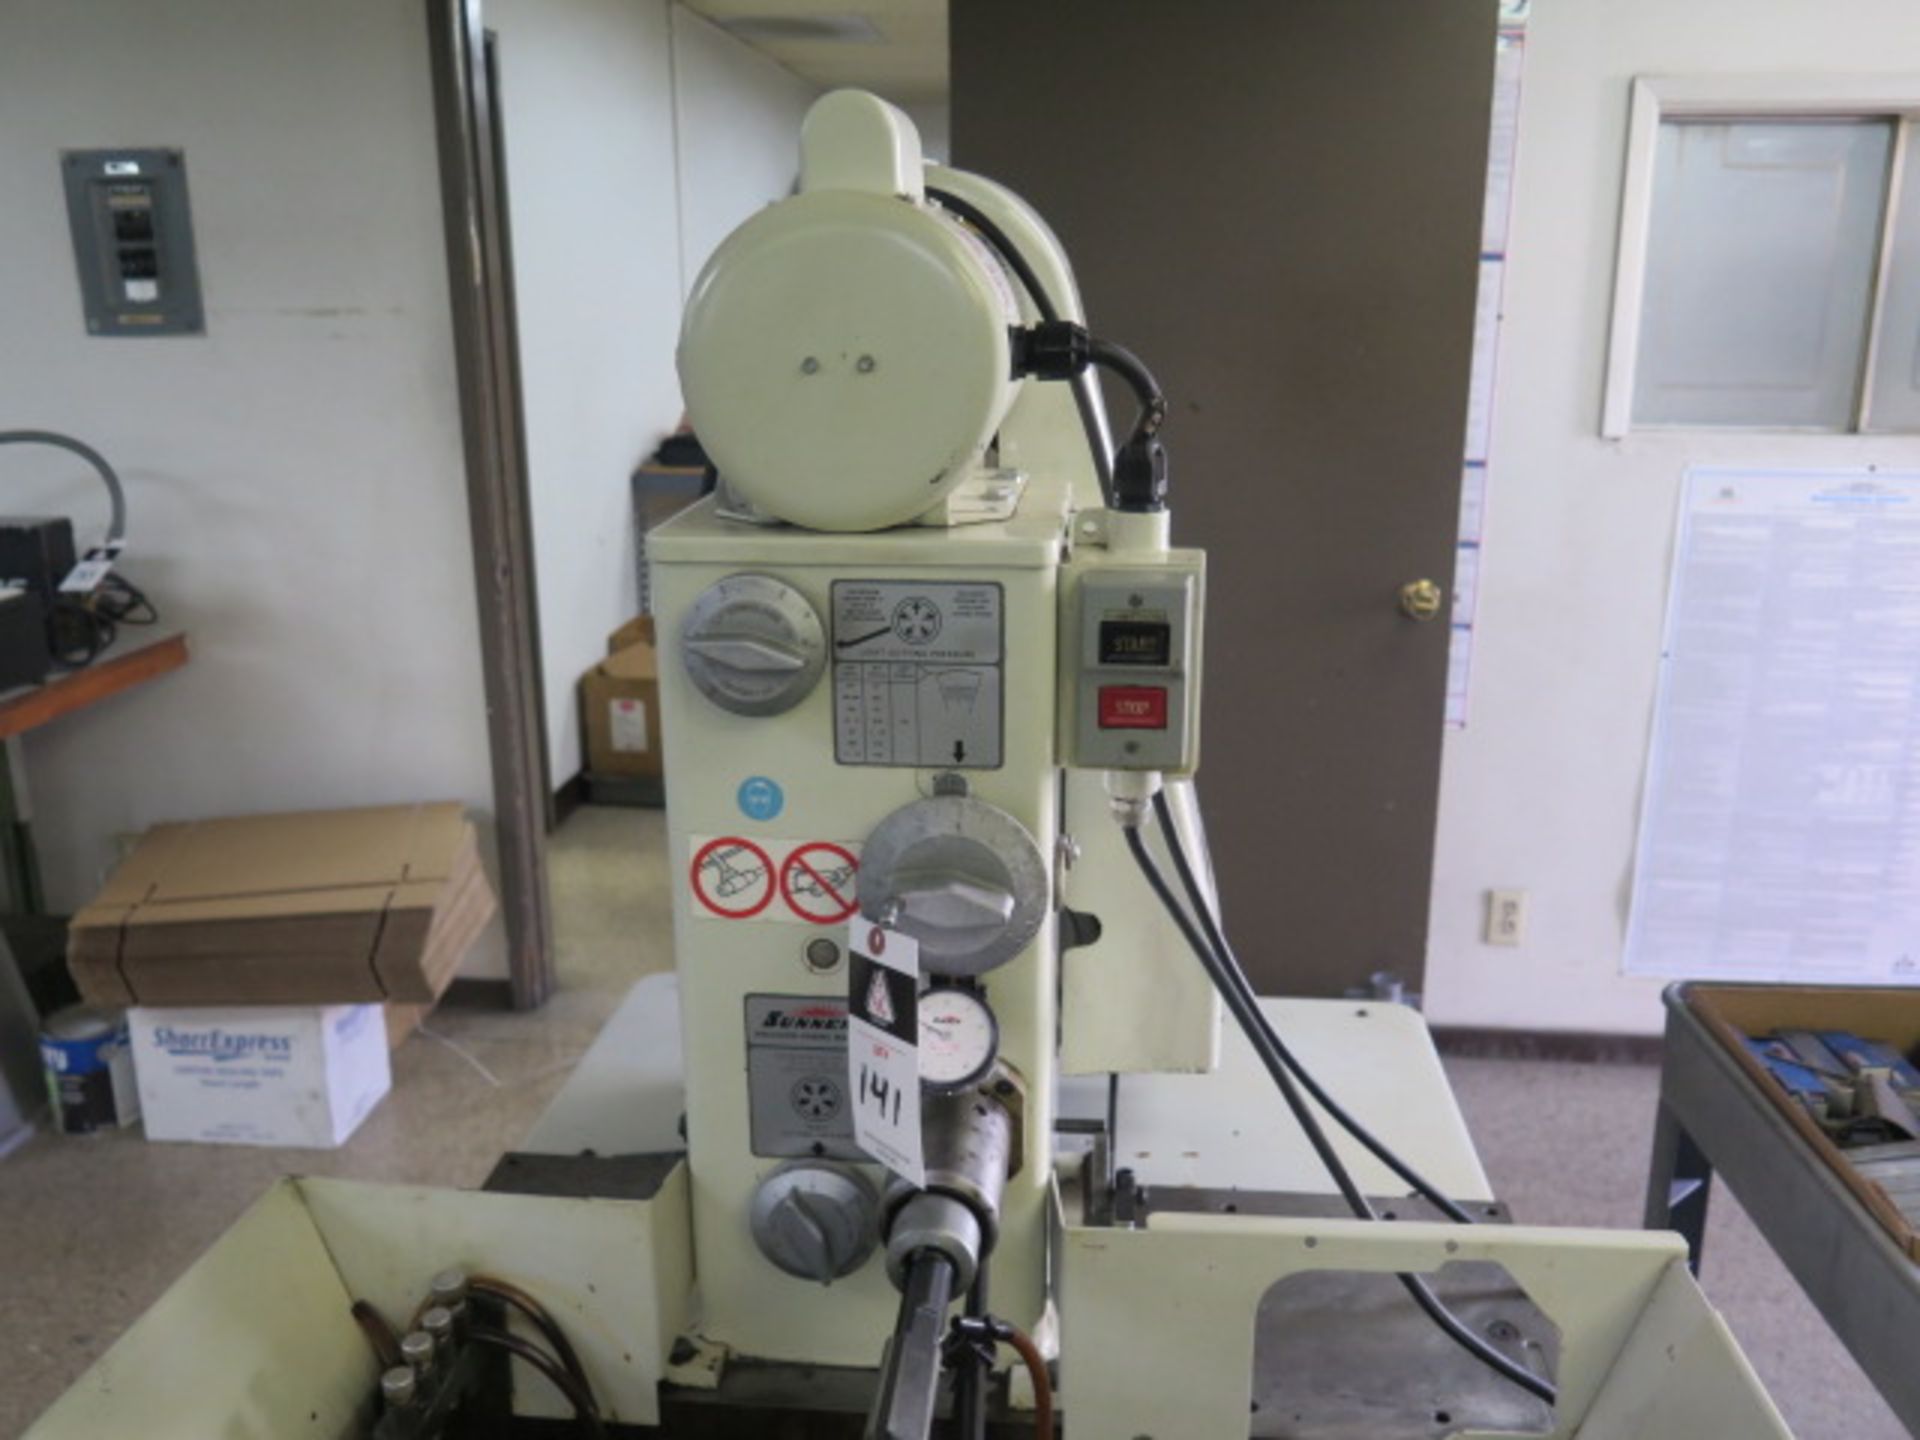 Sunnen MBB-1660-K Precision Honing Machine s/n 3FI-96860 w/ Squaring Attach and Tooling, SOLD AS IS - Image 4 of 14